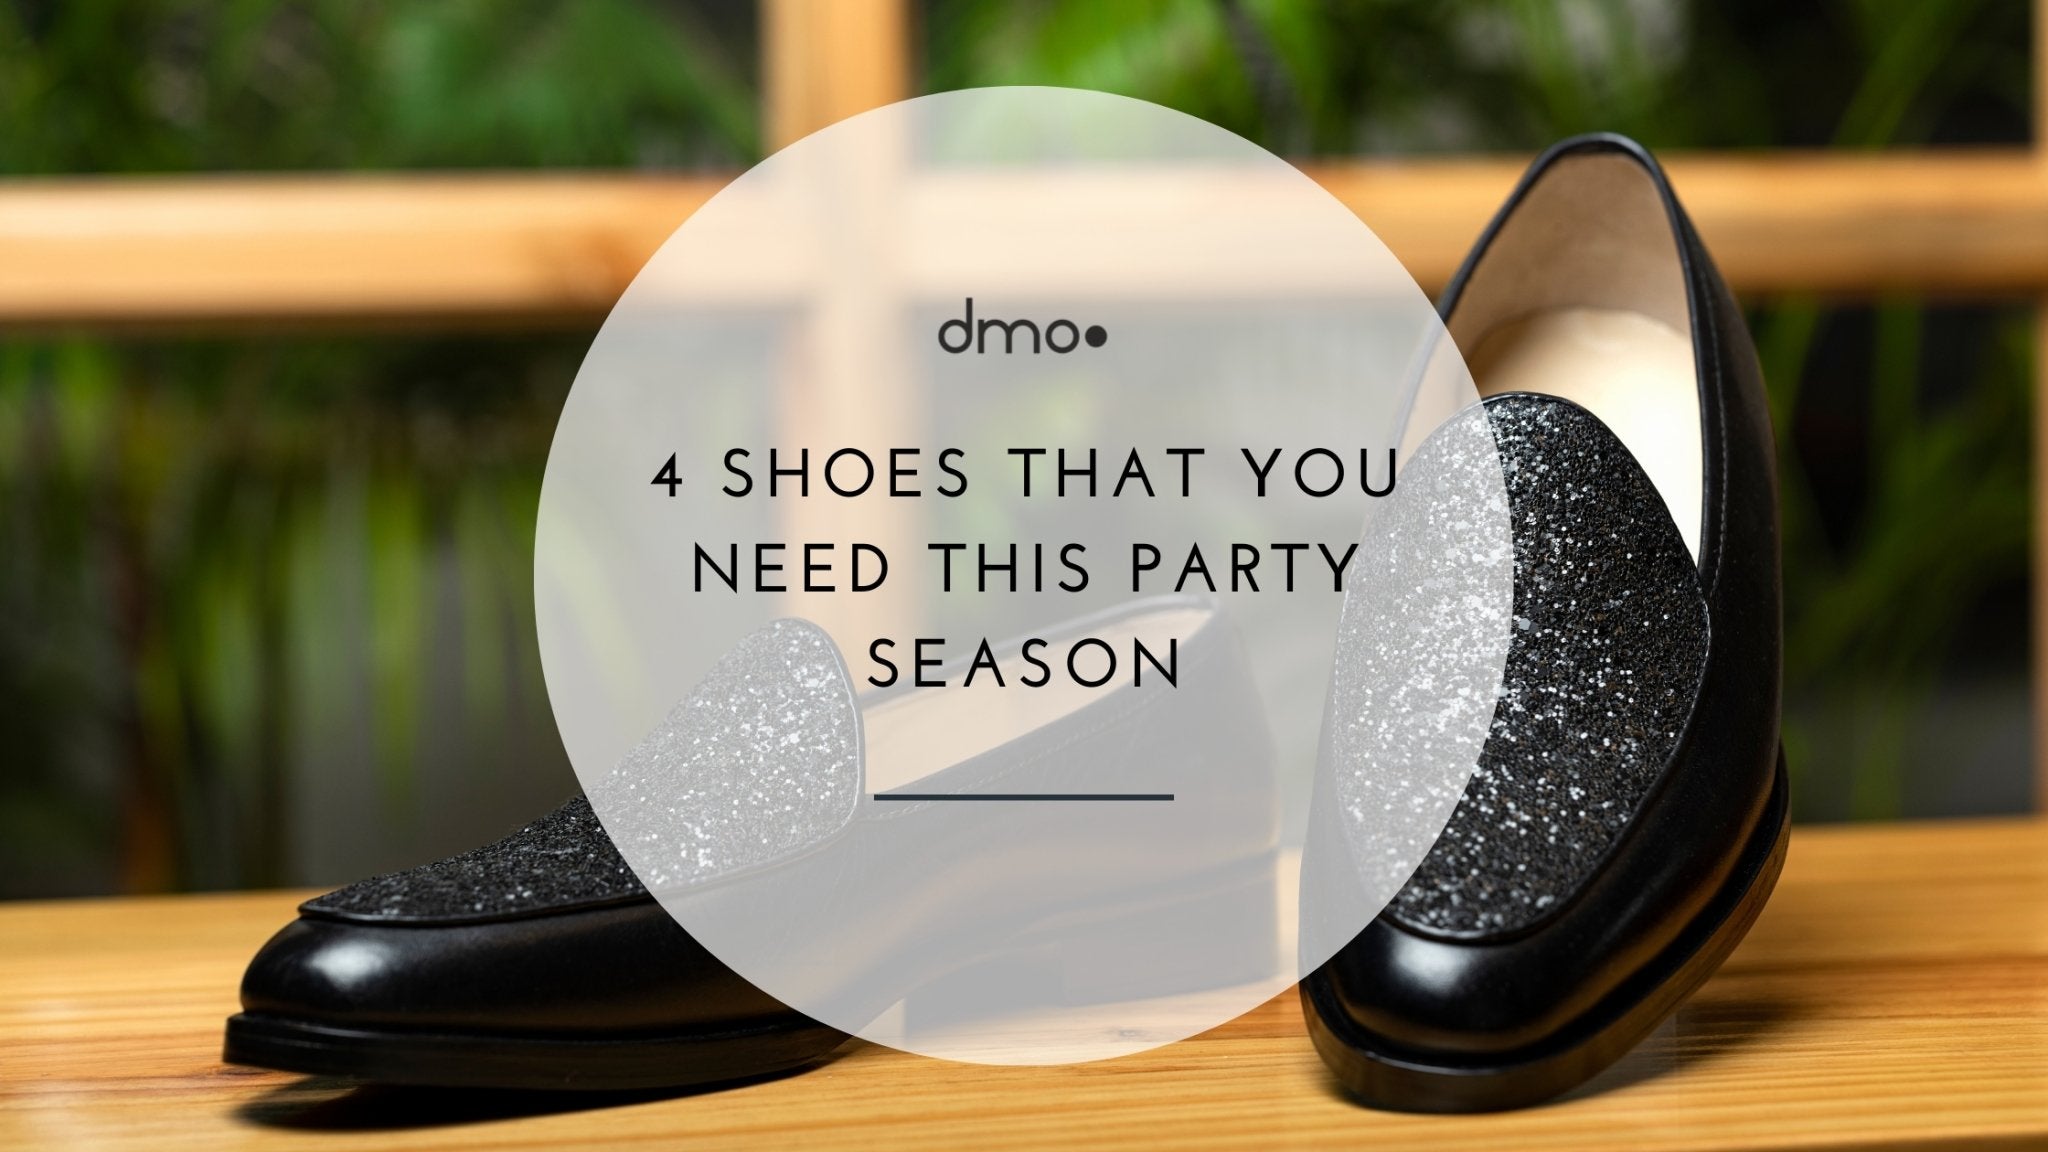 4 Shoes that you need this party season - dmodot Shoes